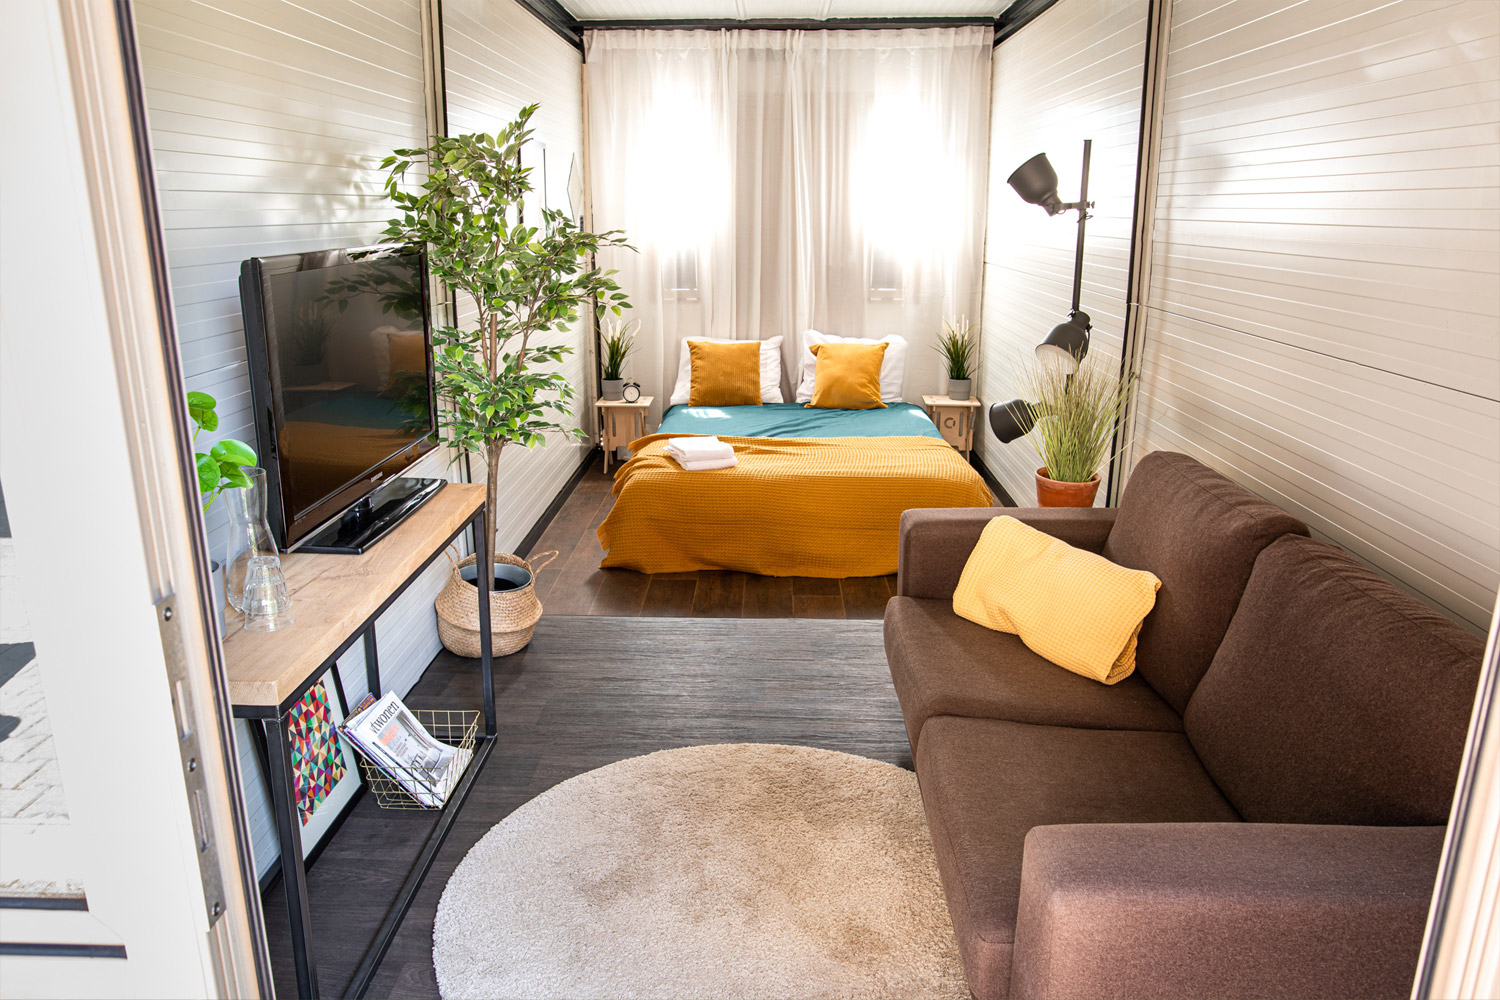 Flexotels Foldable Tiny Homes For Temporary housing